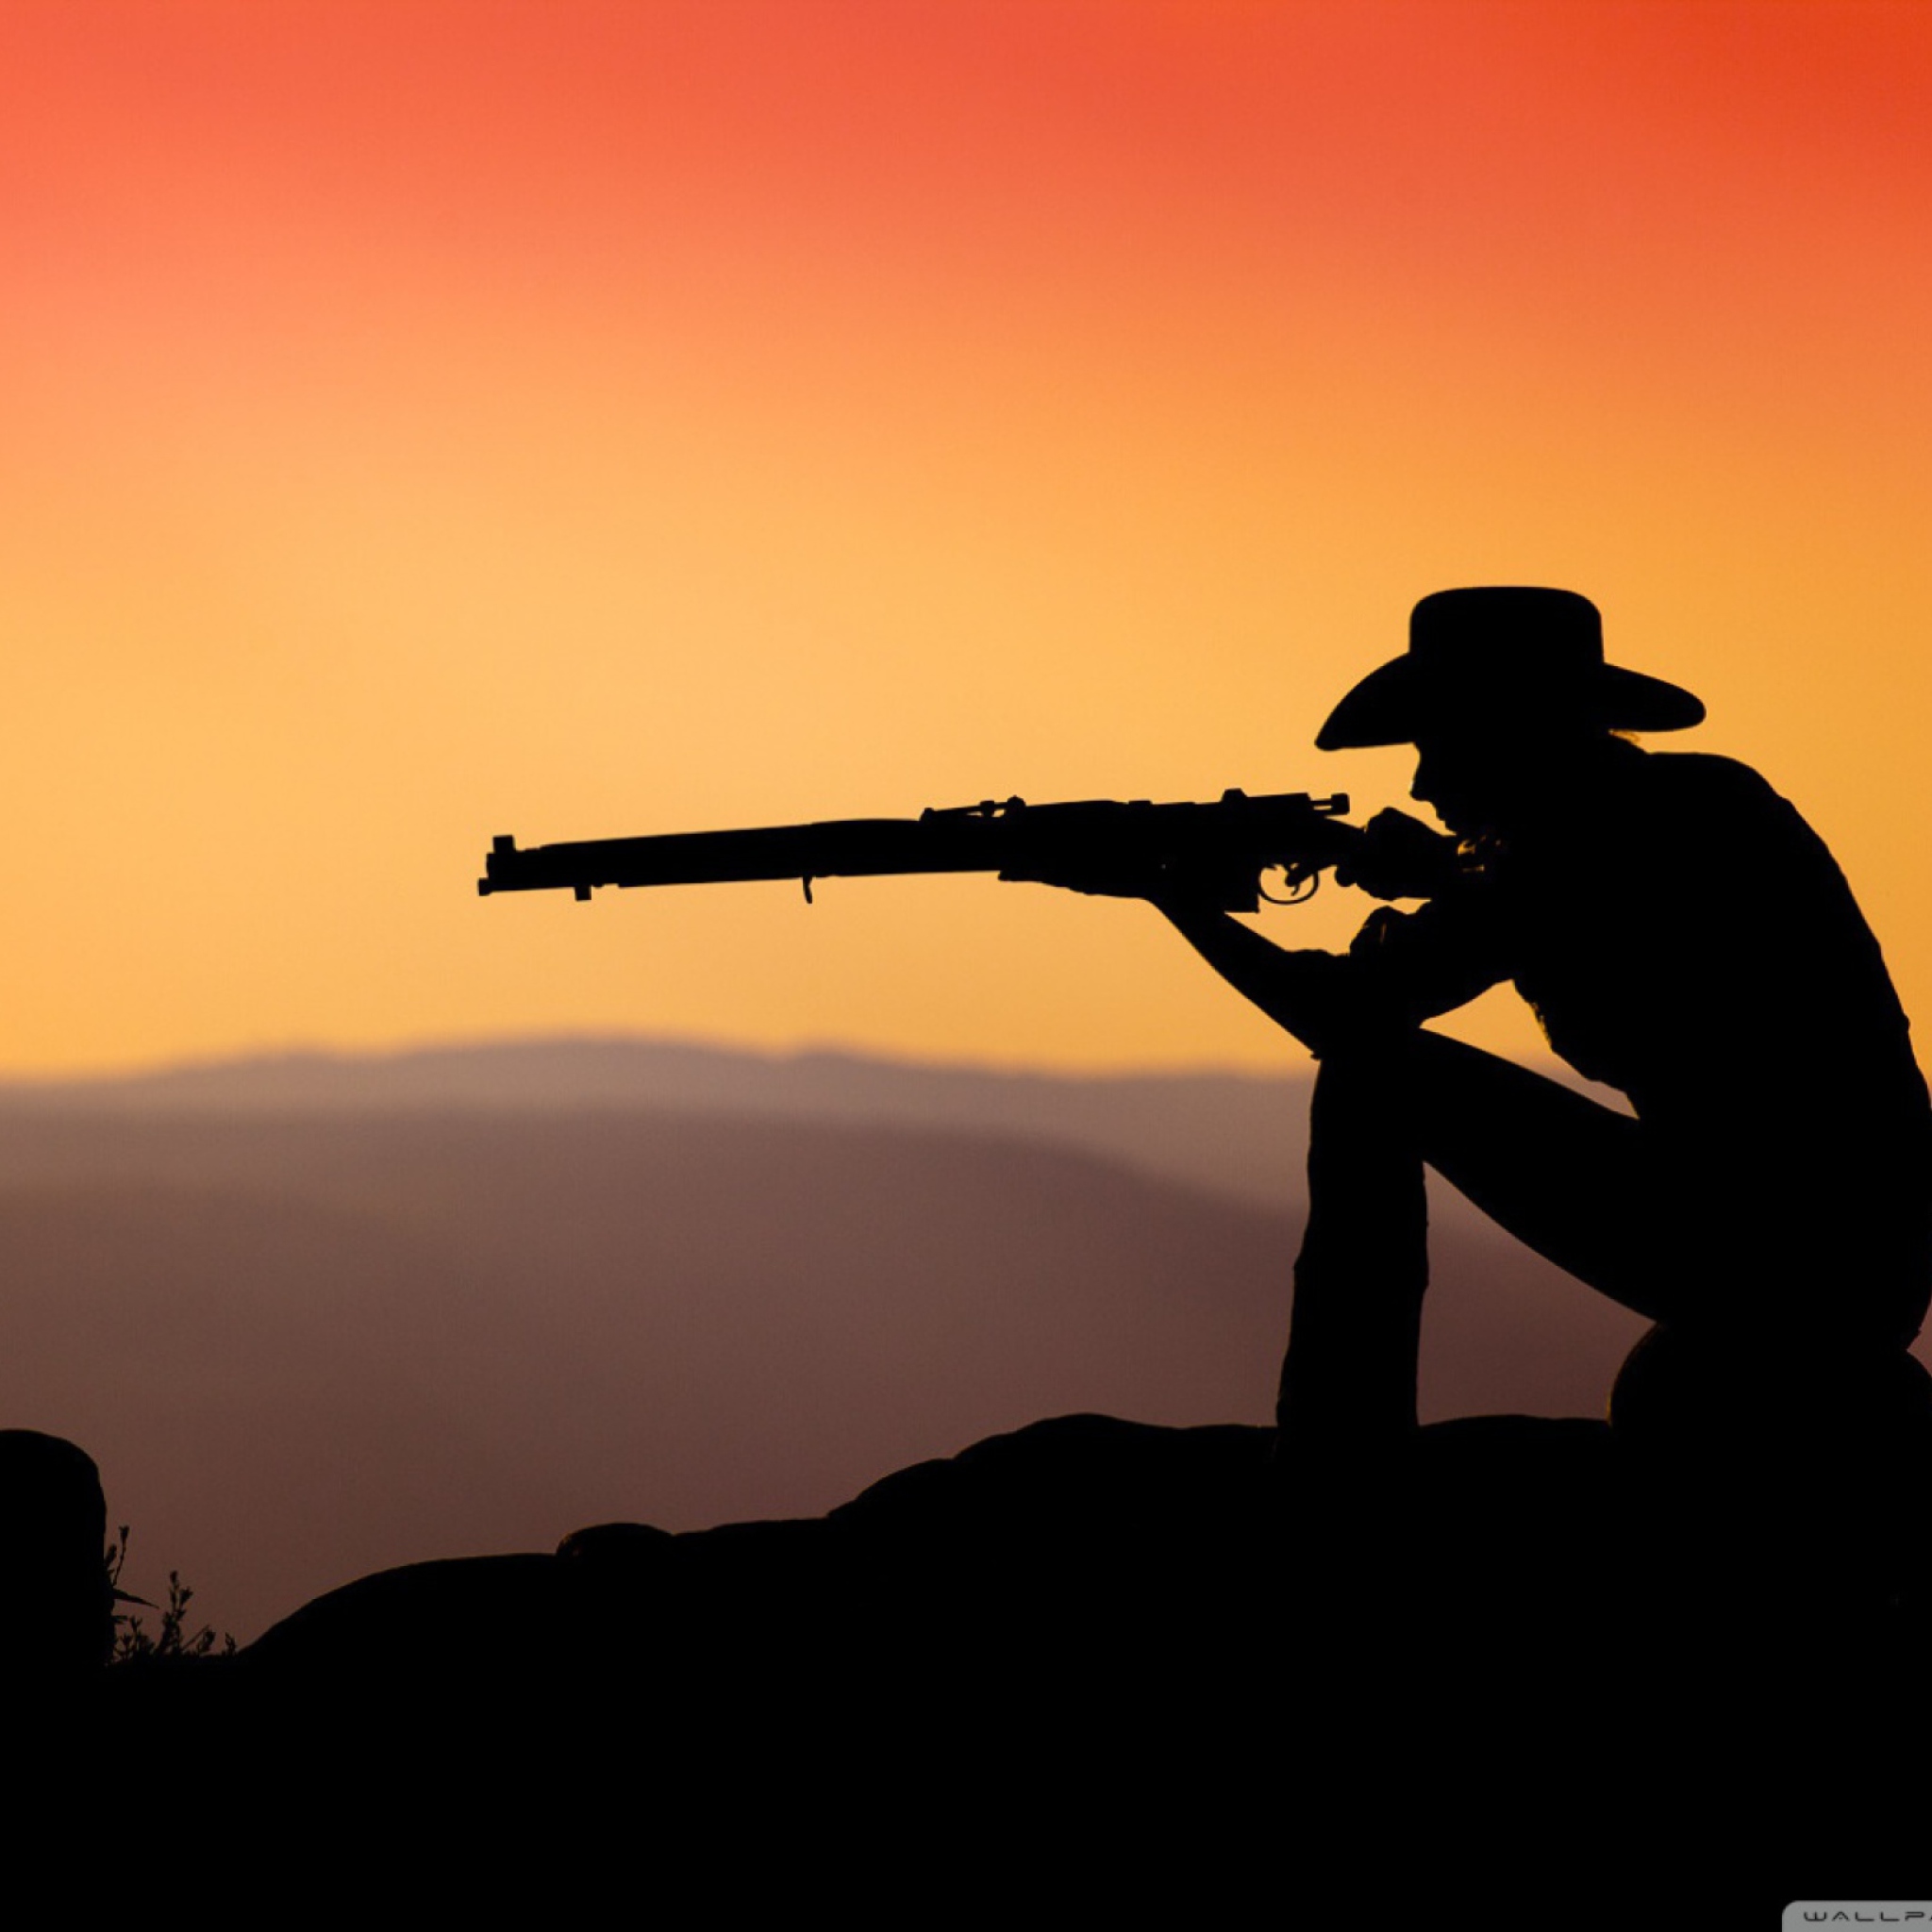 Cowboy Shooting In The Sunset wallpaper 2048x2048